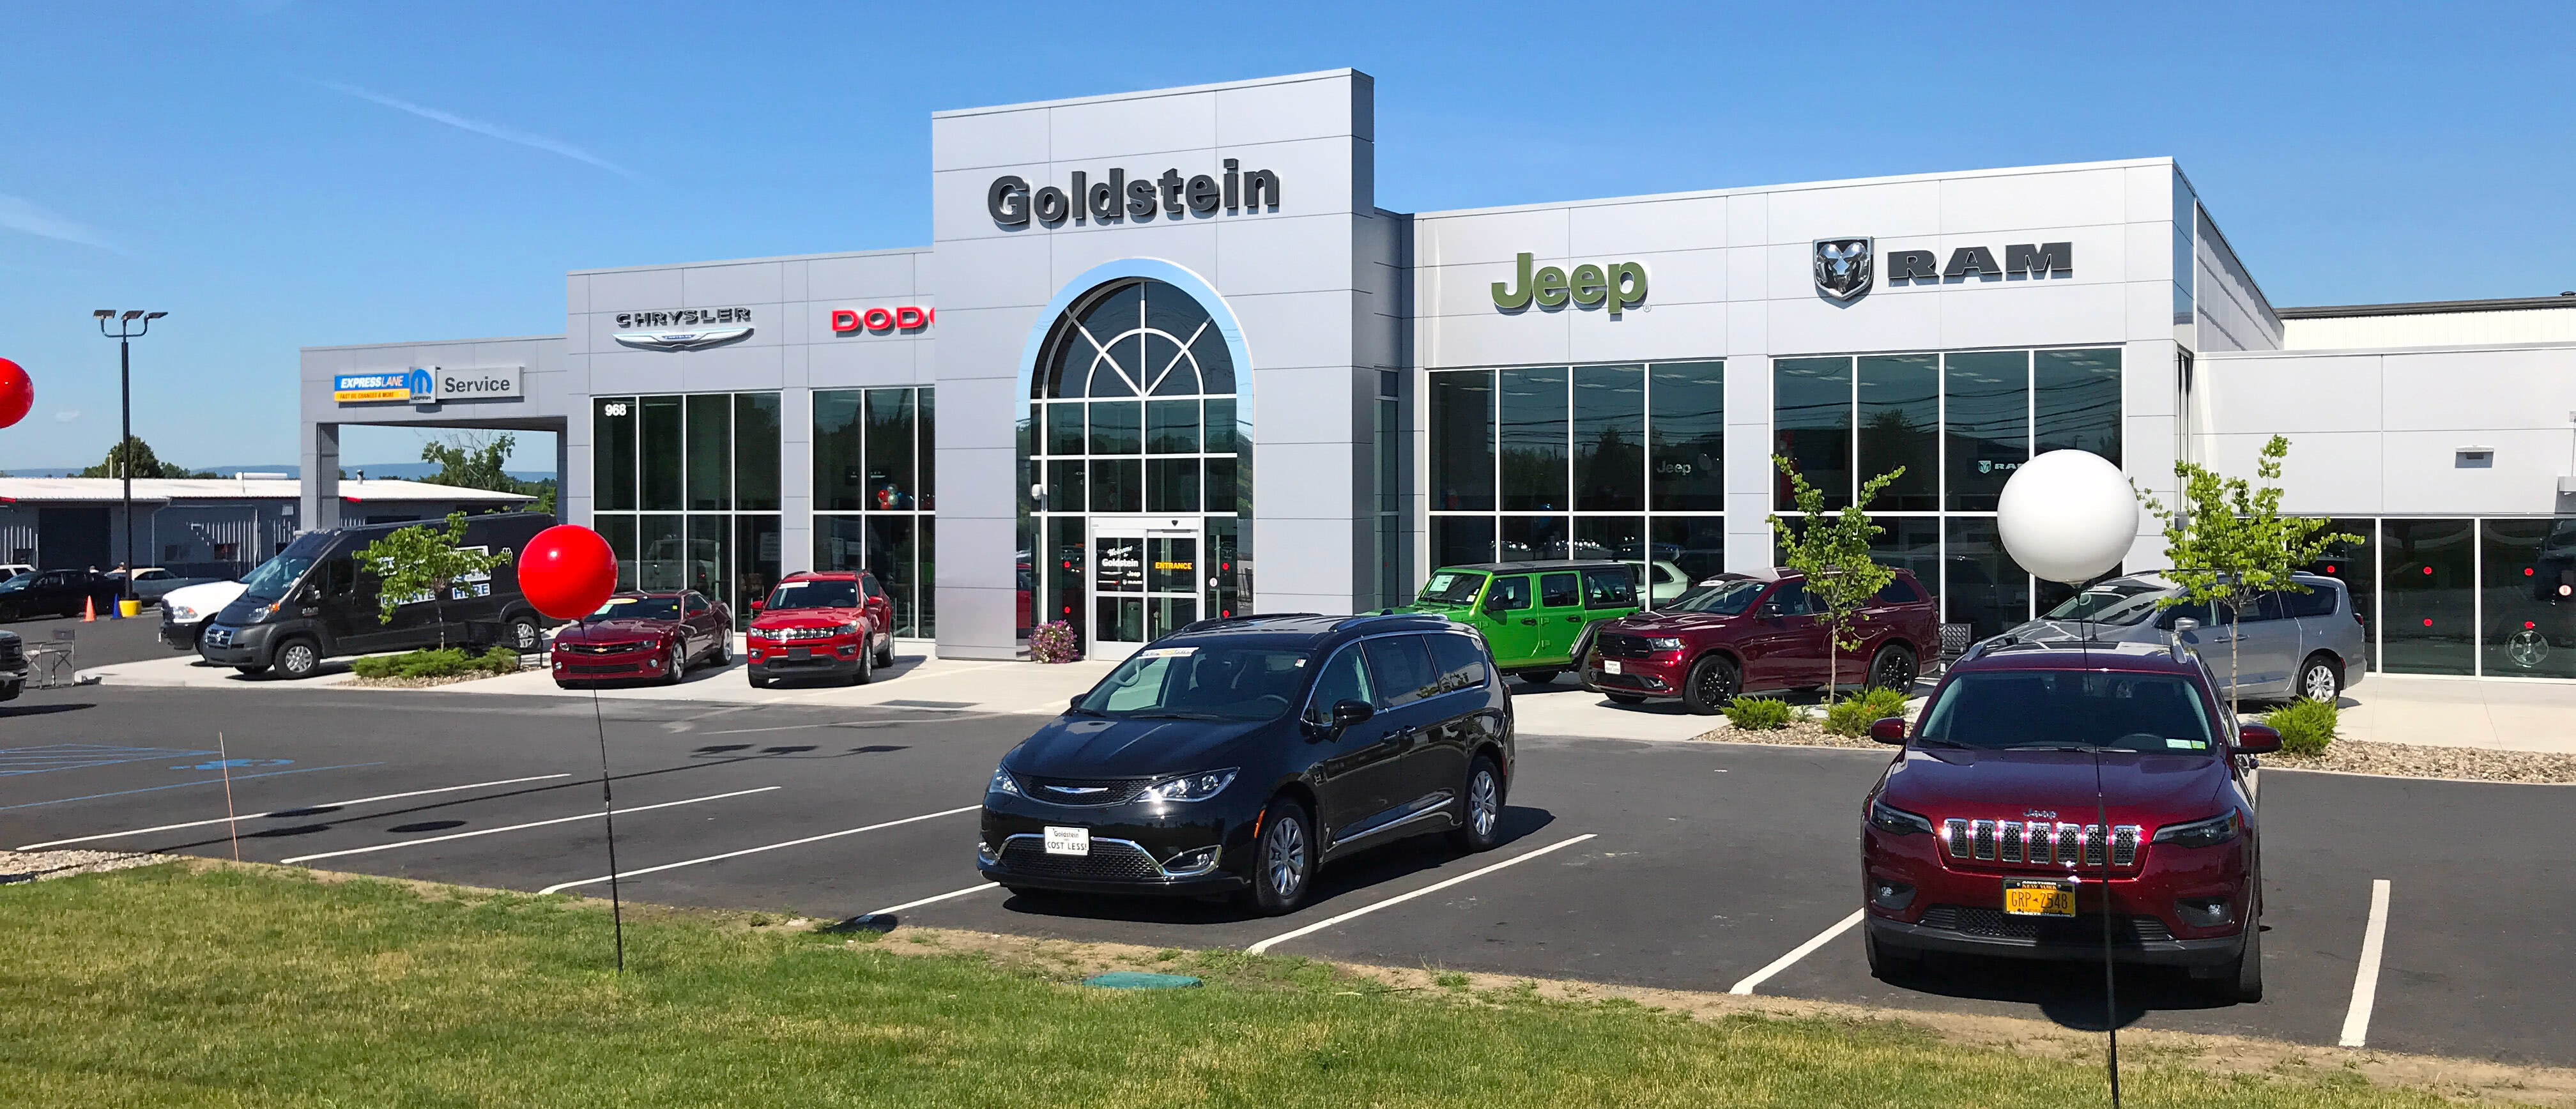 Outside and Inside of dealership - Goldstein Chrysler Jeep Dodge Ram in Albany NY